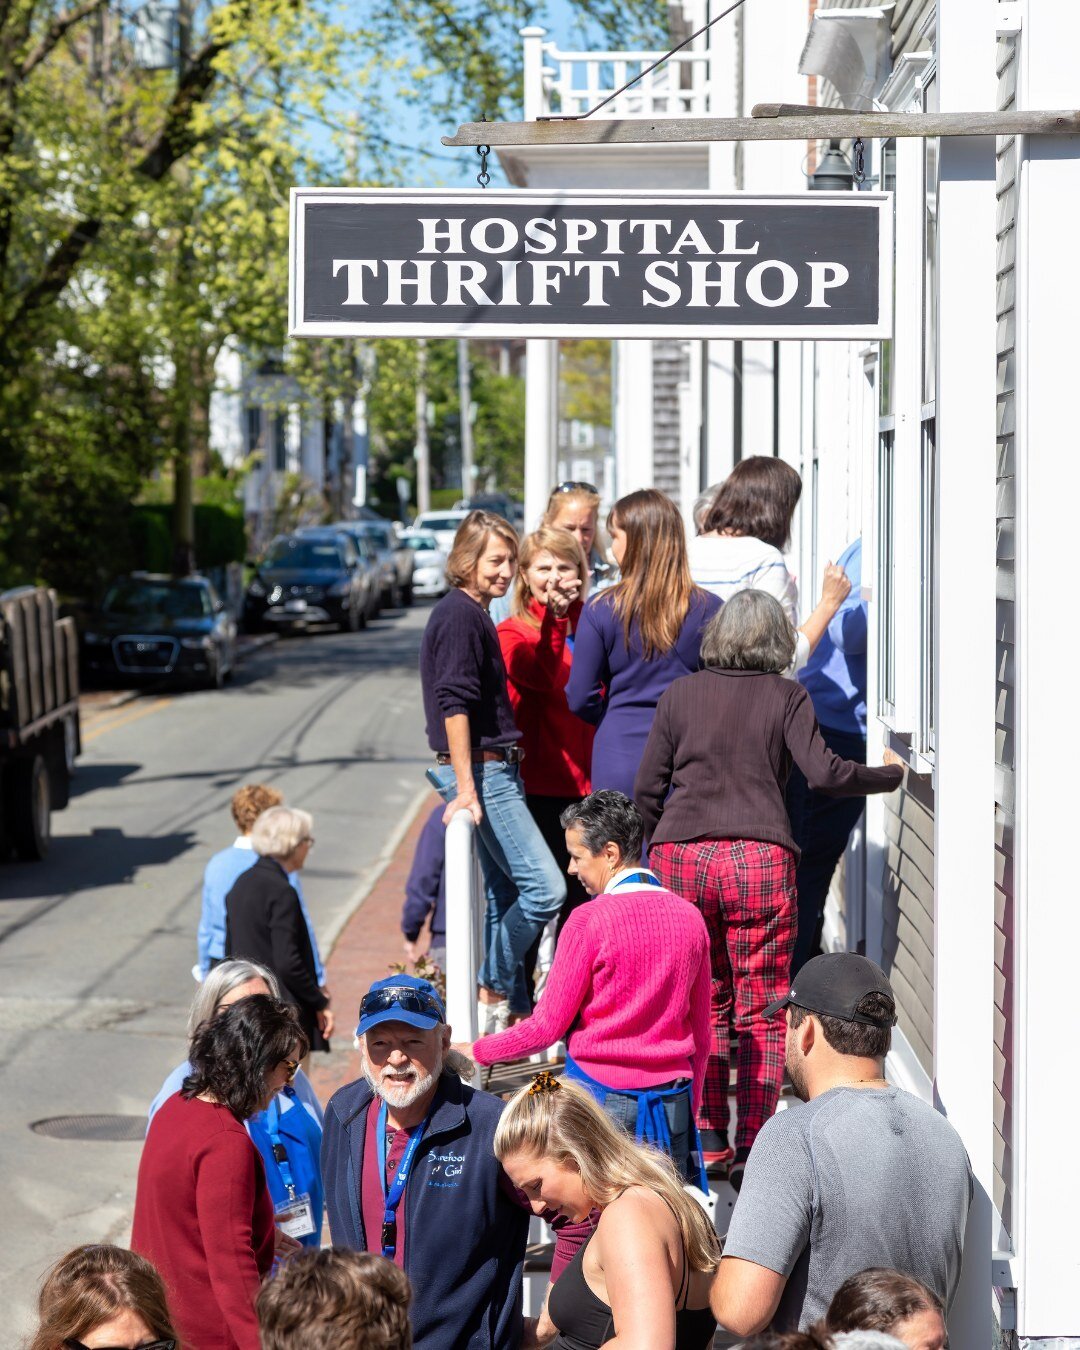 The Hospital Thrift Shop is back again! 🛍 The store reopened Monday morning for its 94th year in business supporting @ackhospital. A sizable crowd lined up along India Street for what has become a popular springtime tradition looked forward to by is